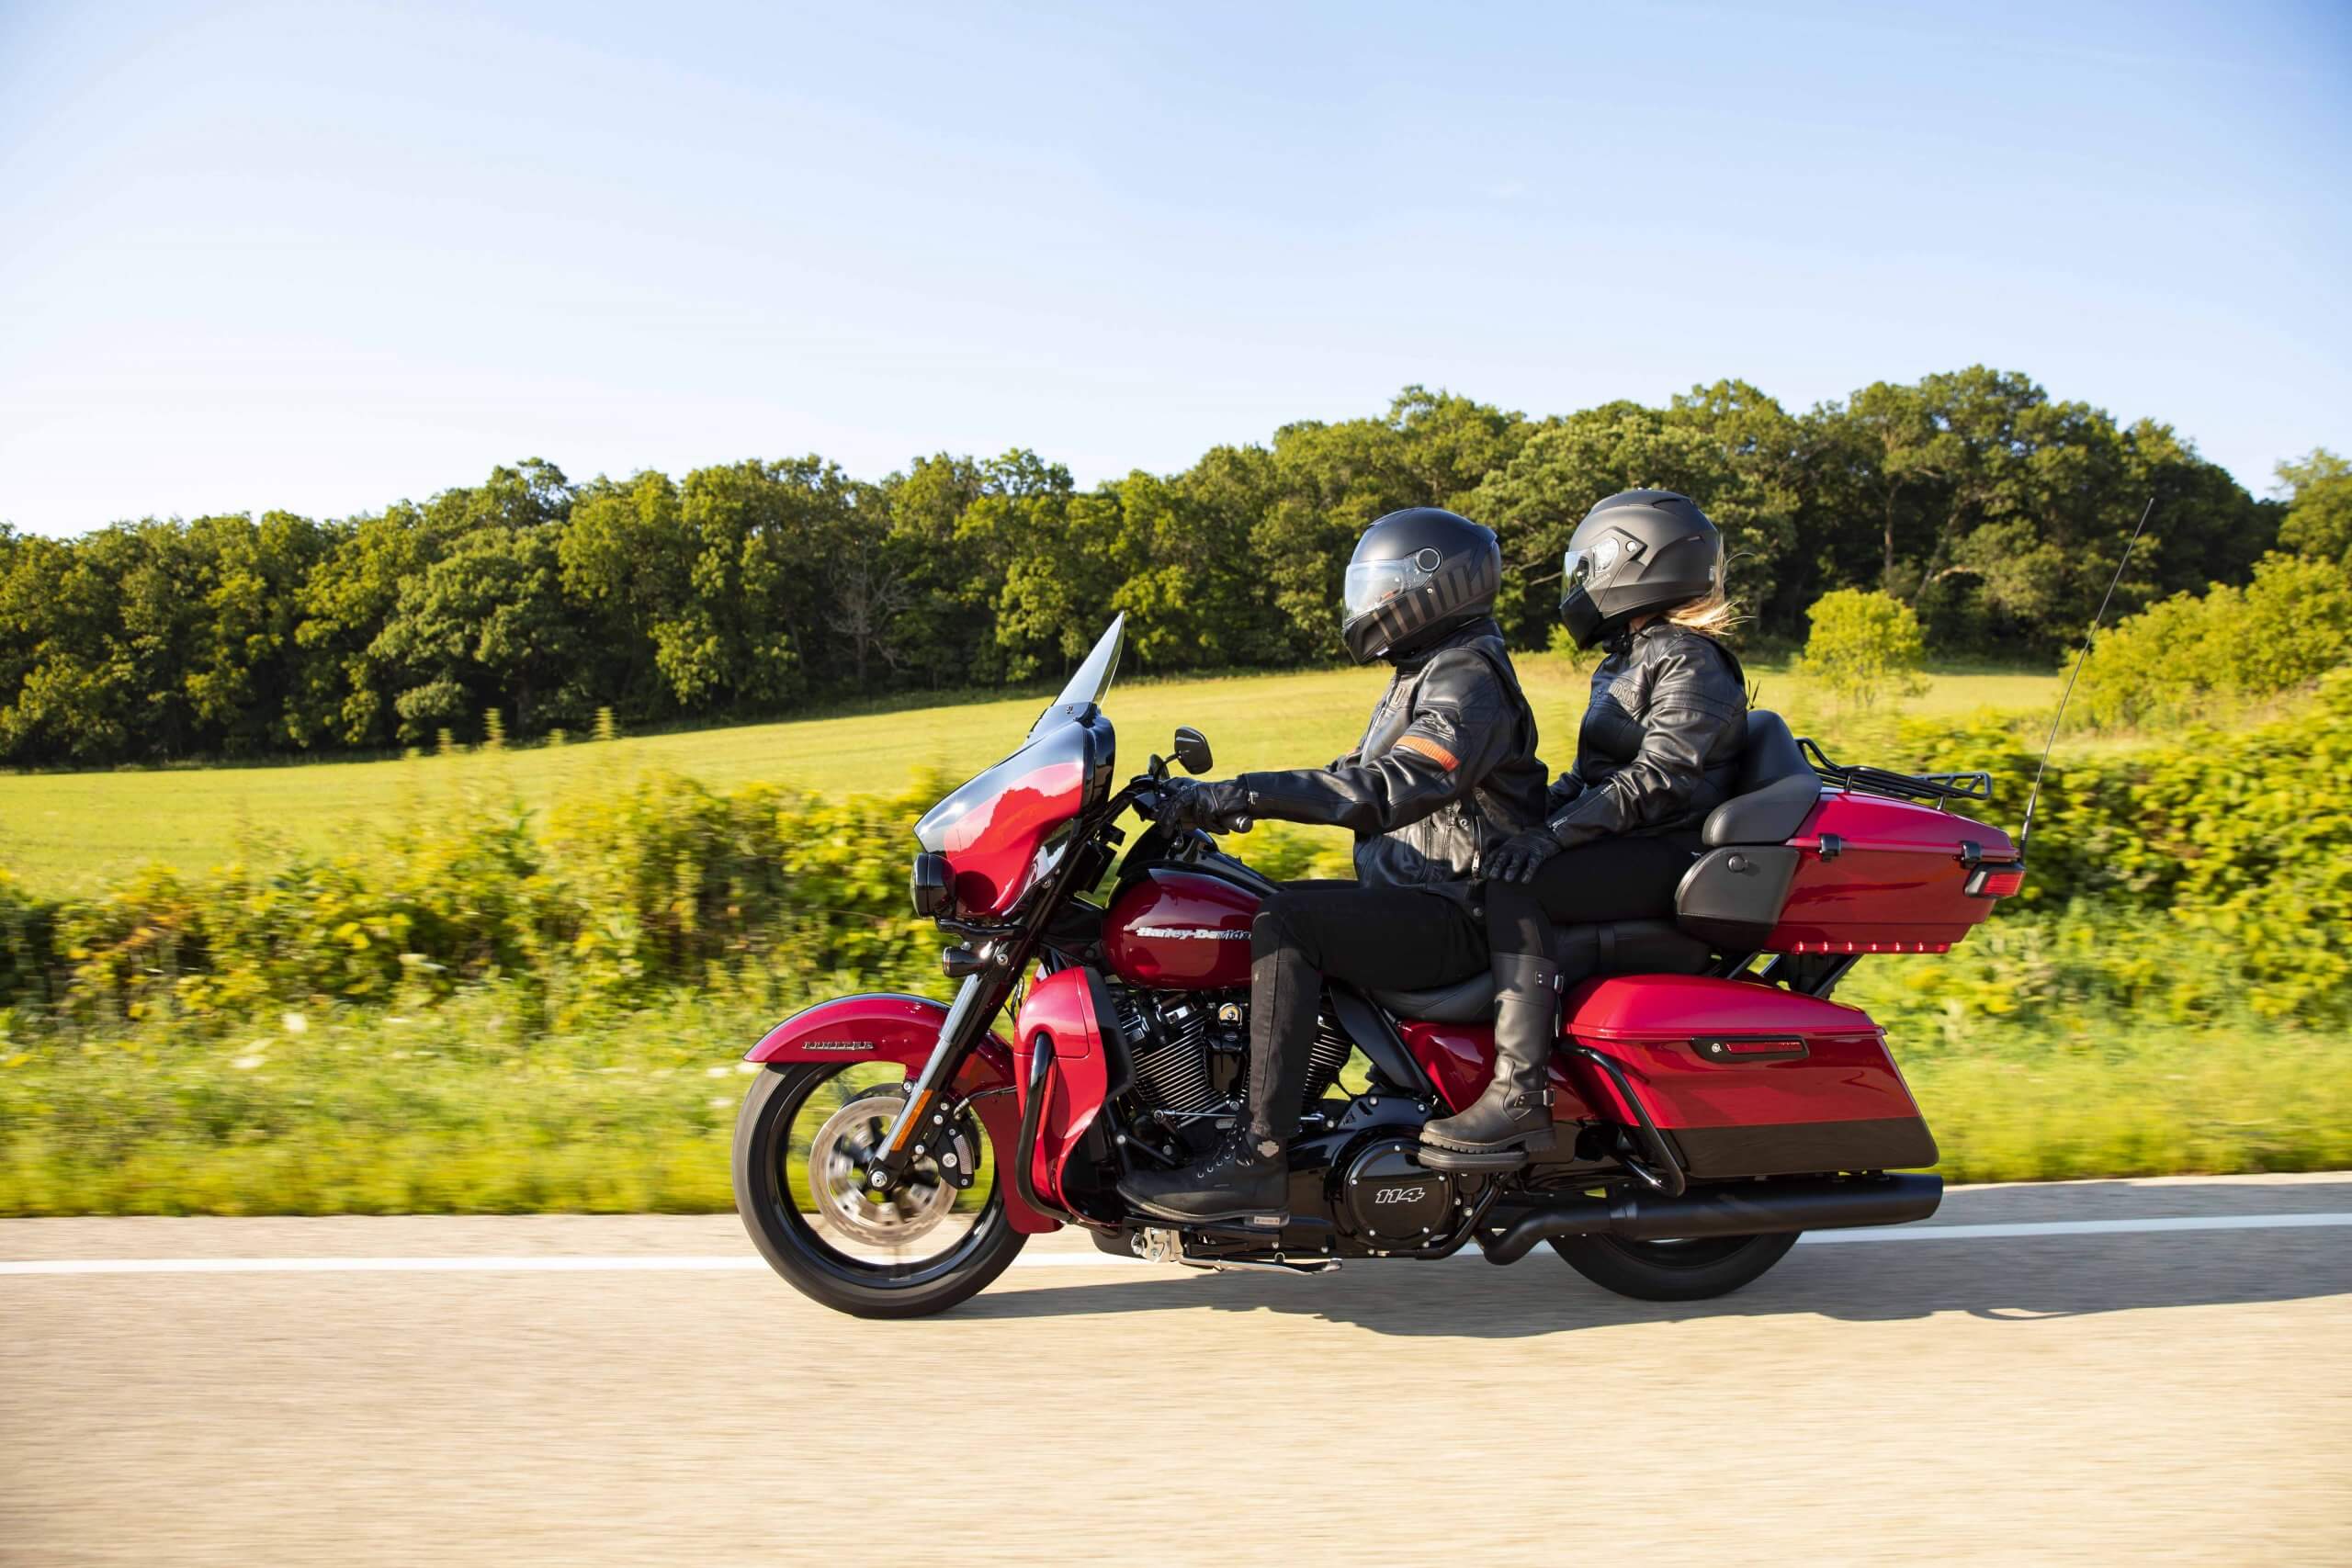 Riders seeking the fully-loaded touring experience